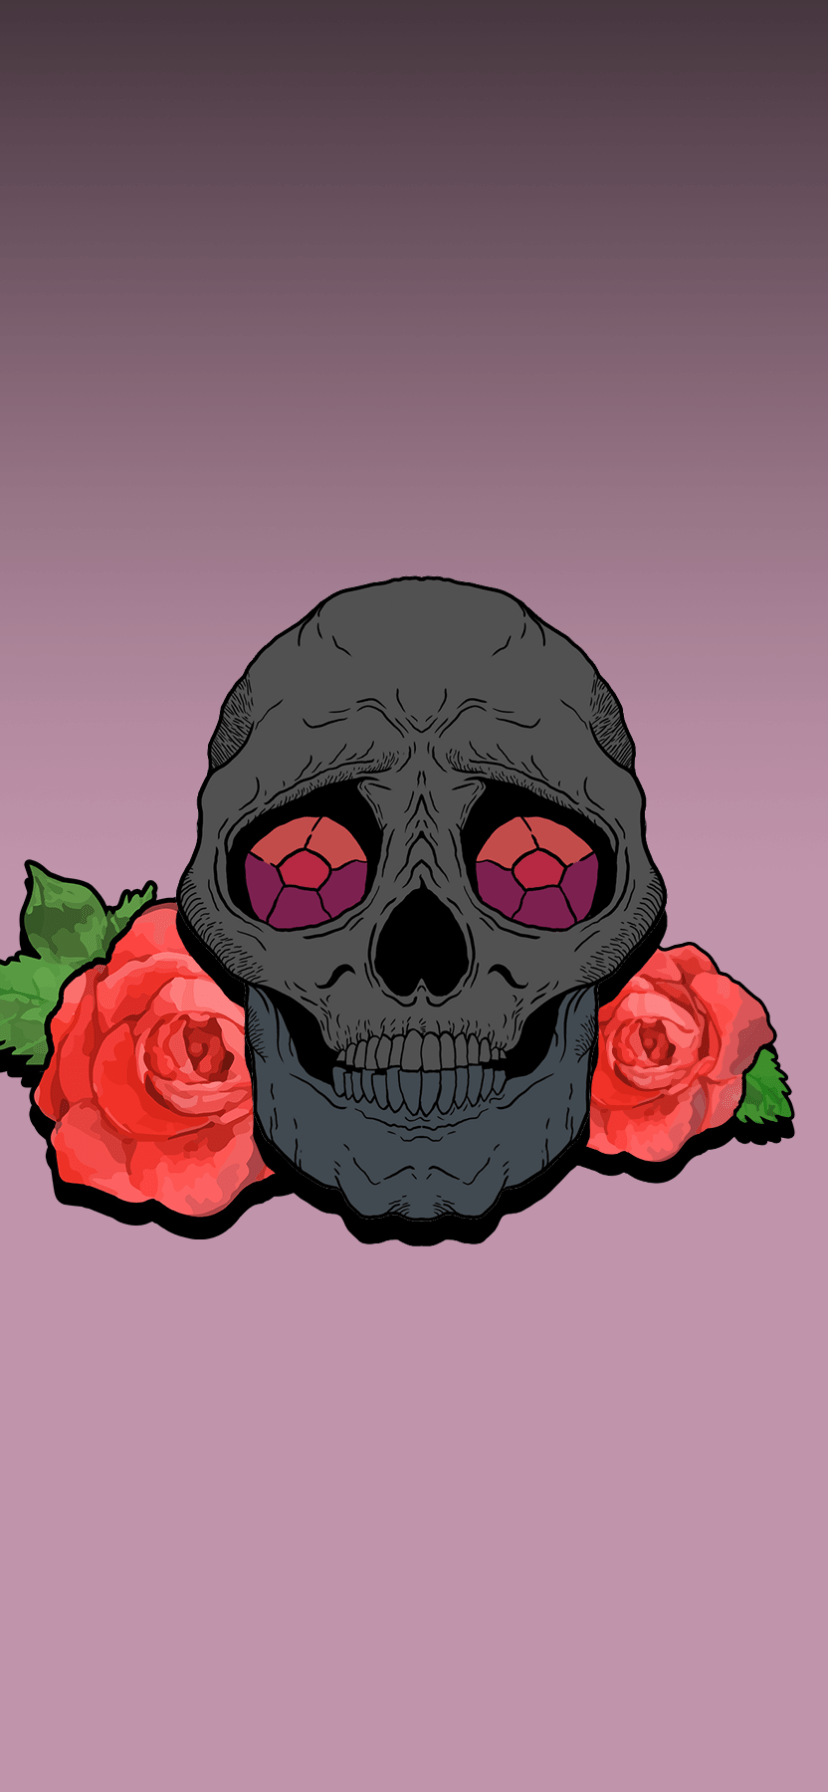 A skull with a rose on each side - Skull